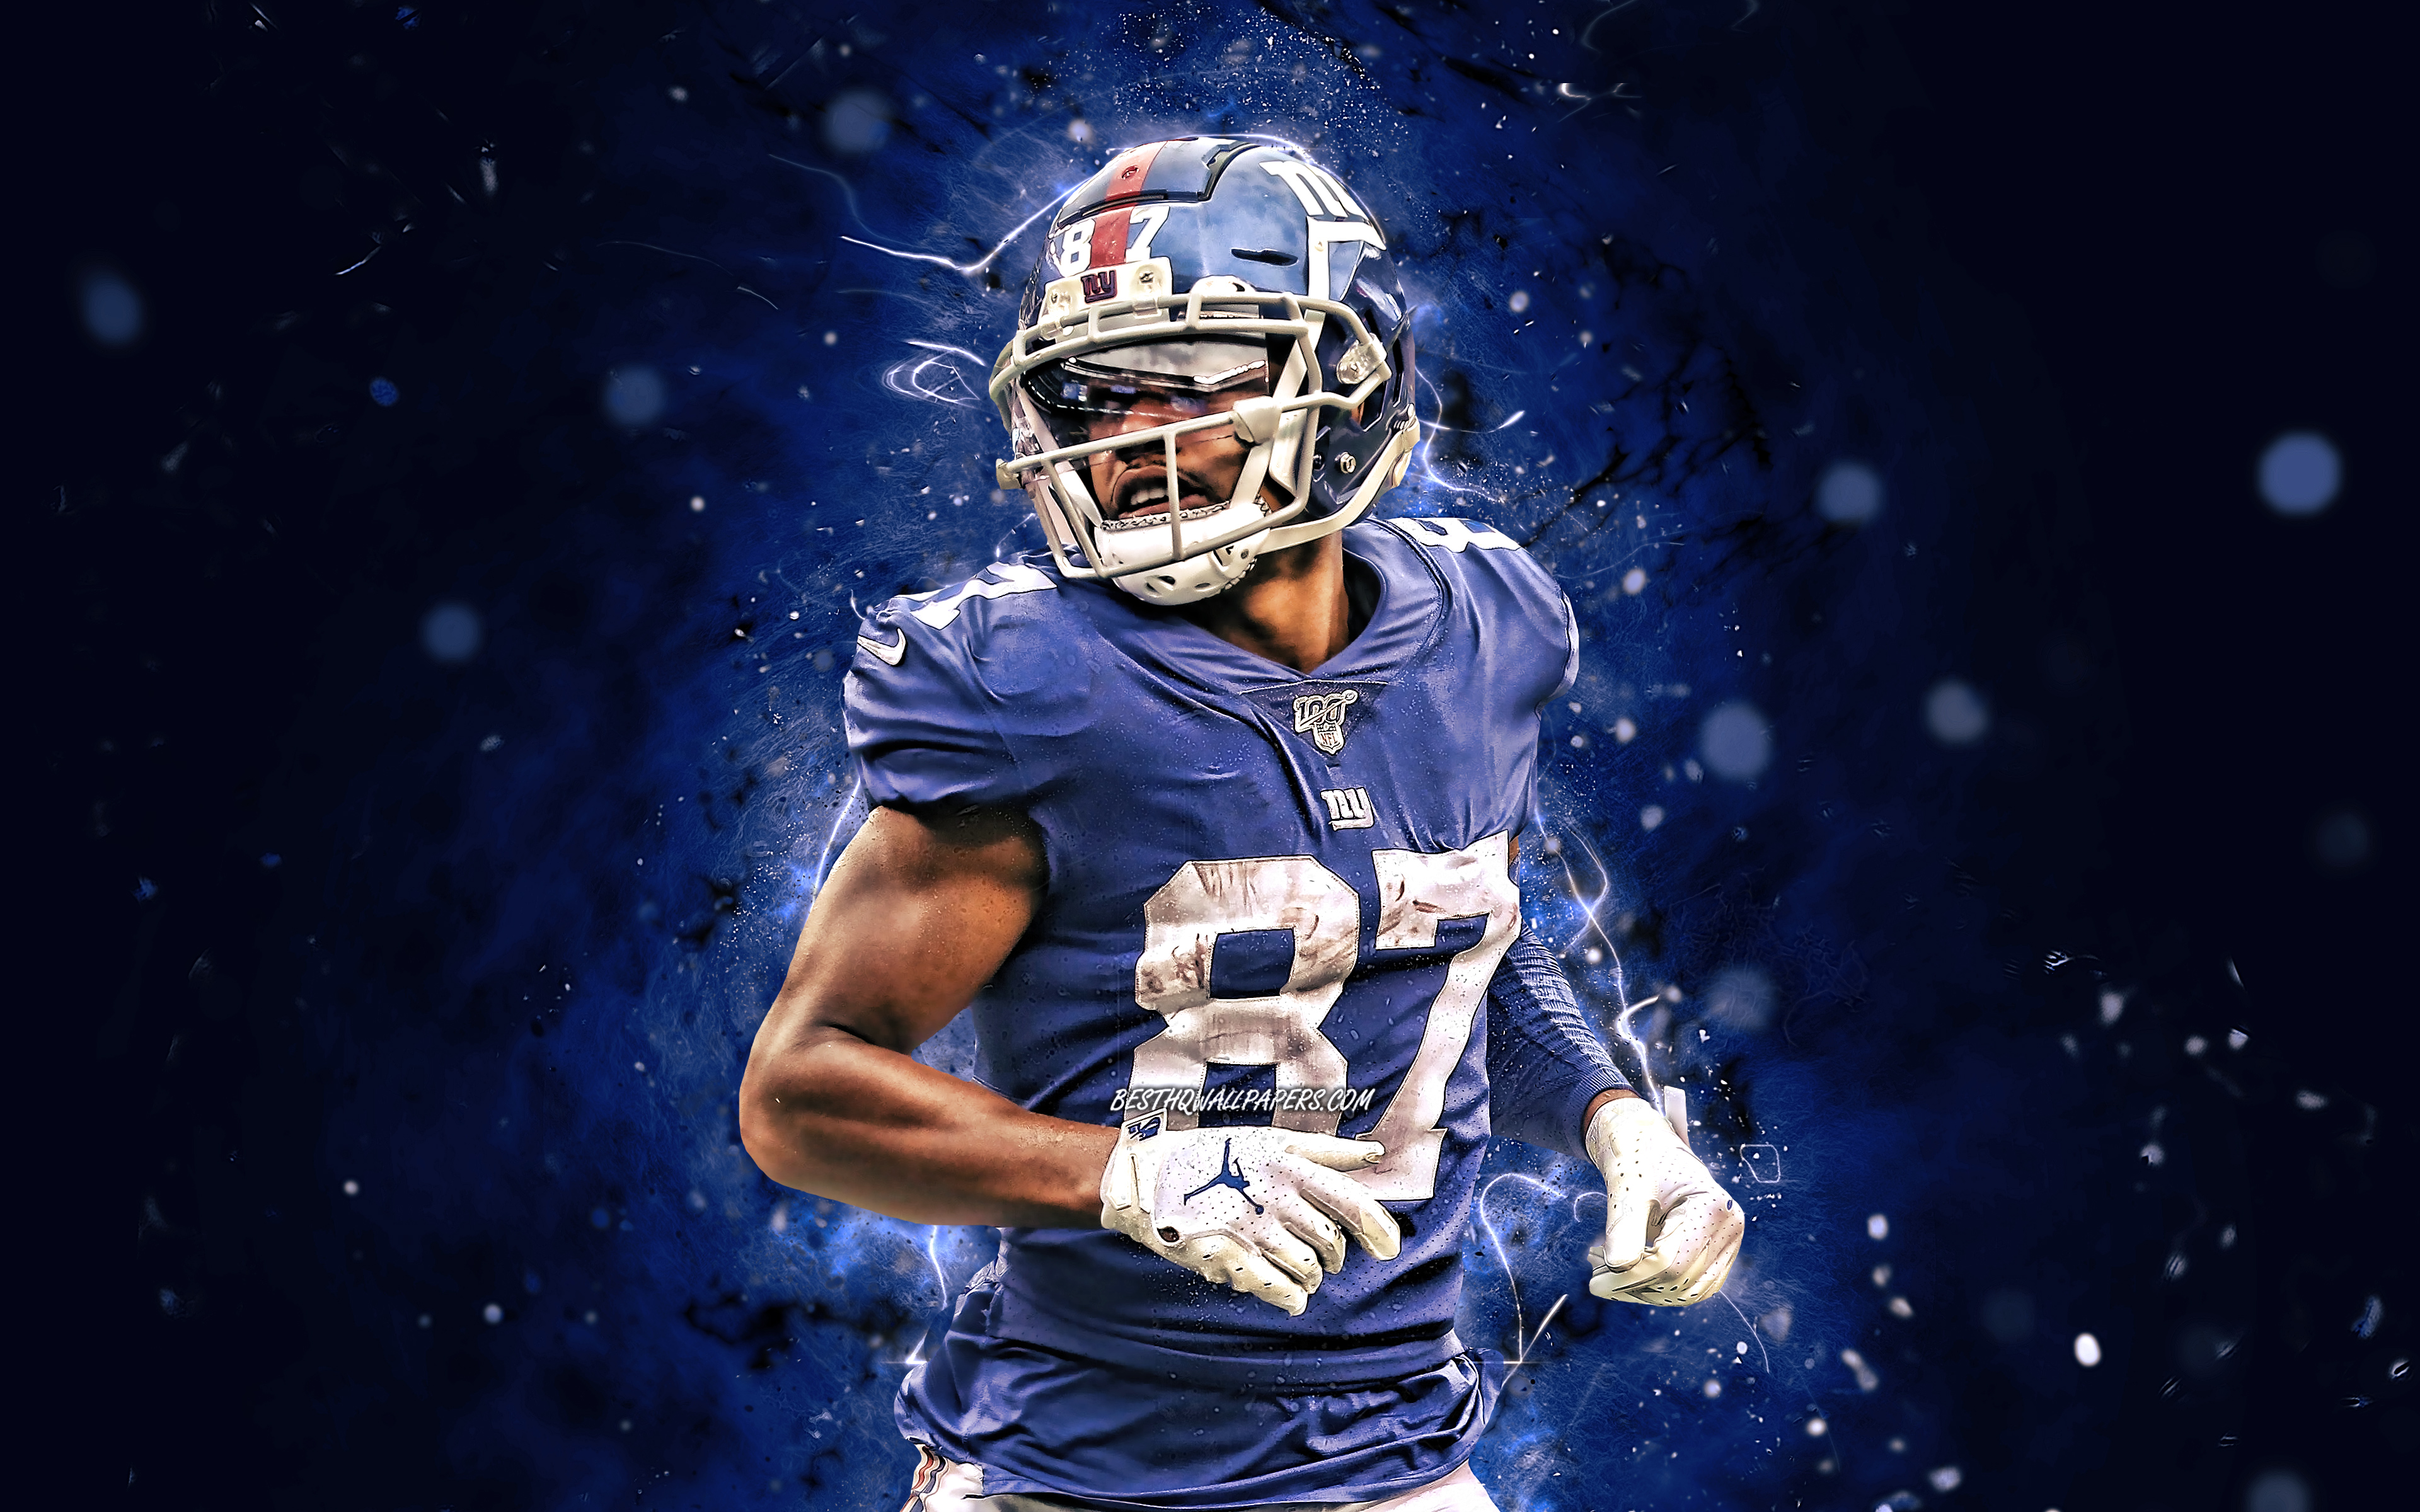 NY Giants Wallpaper and Screensaver (66+ images)